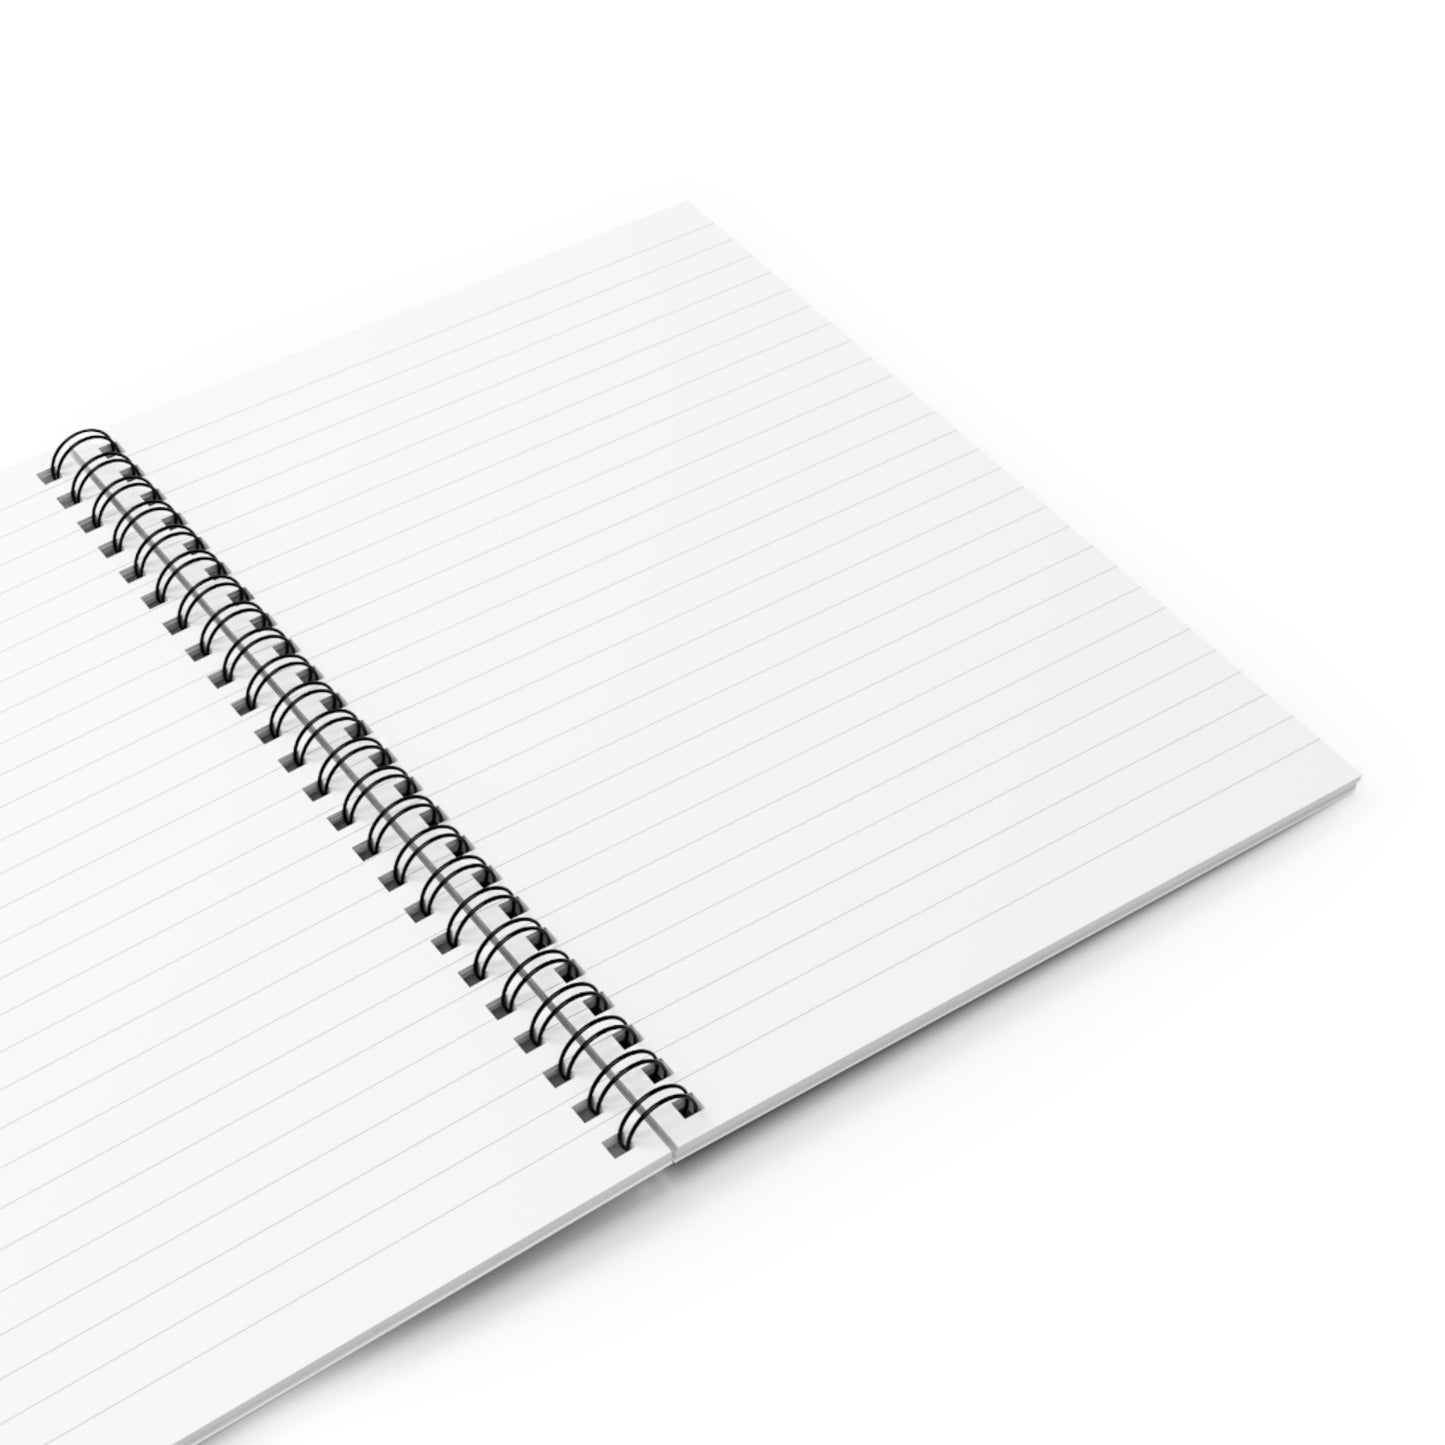 Spiral Notebook with Dark Academia Cover Opened with Blank White College Ruled Pages